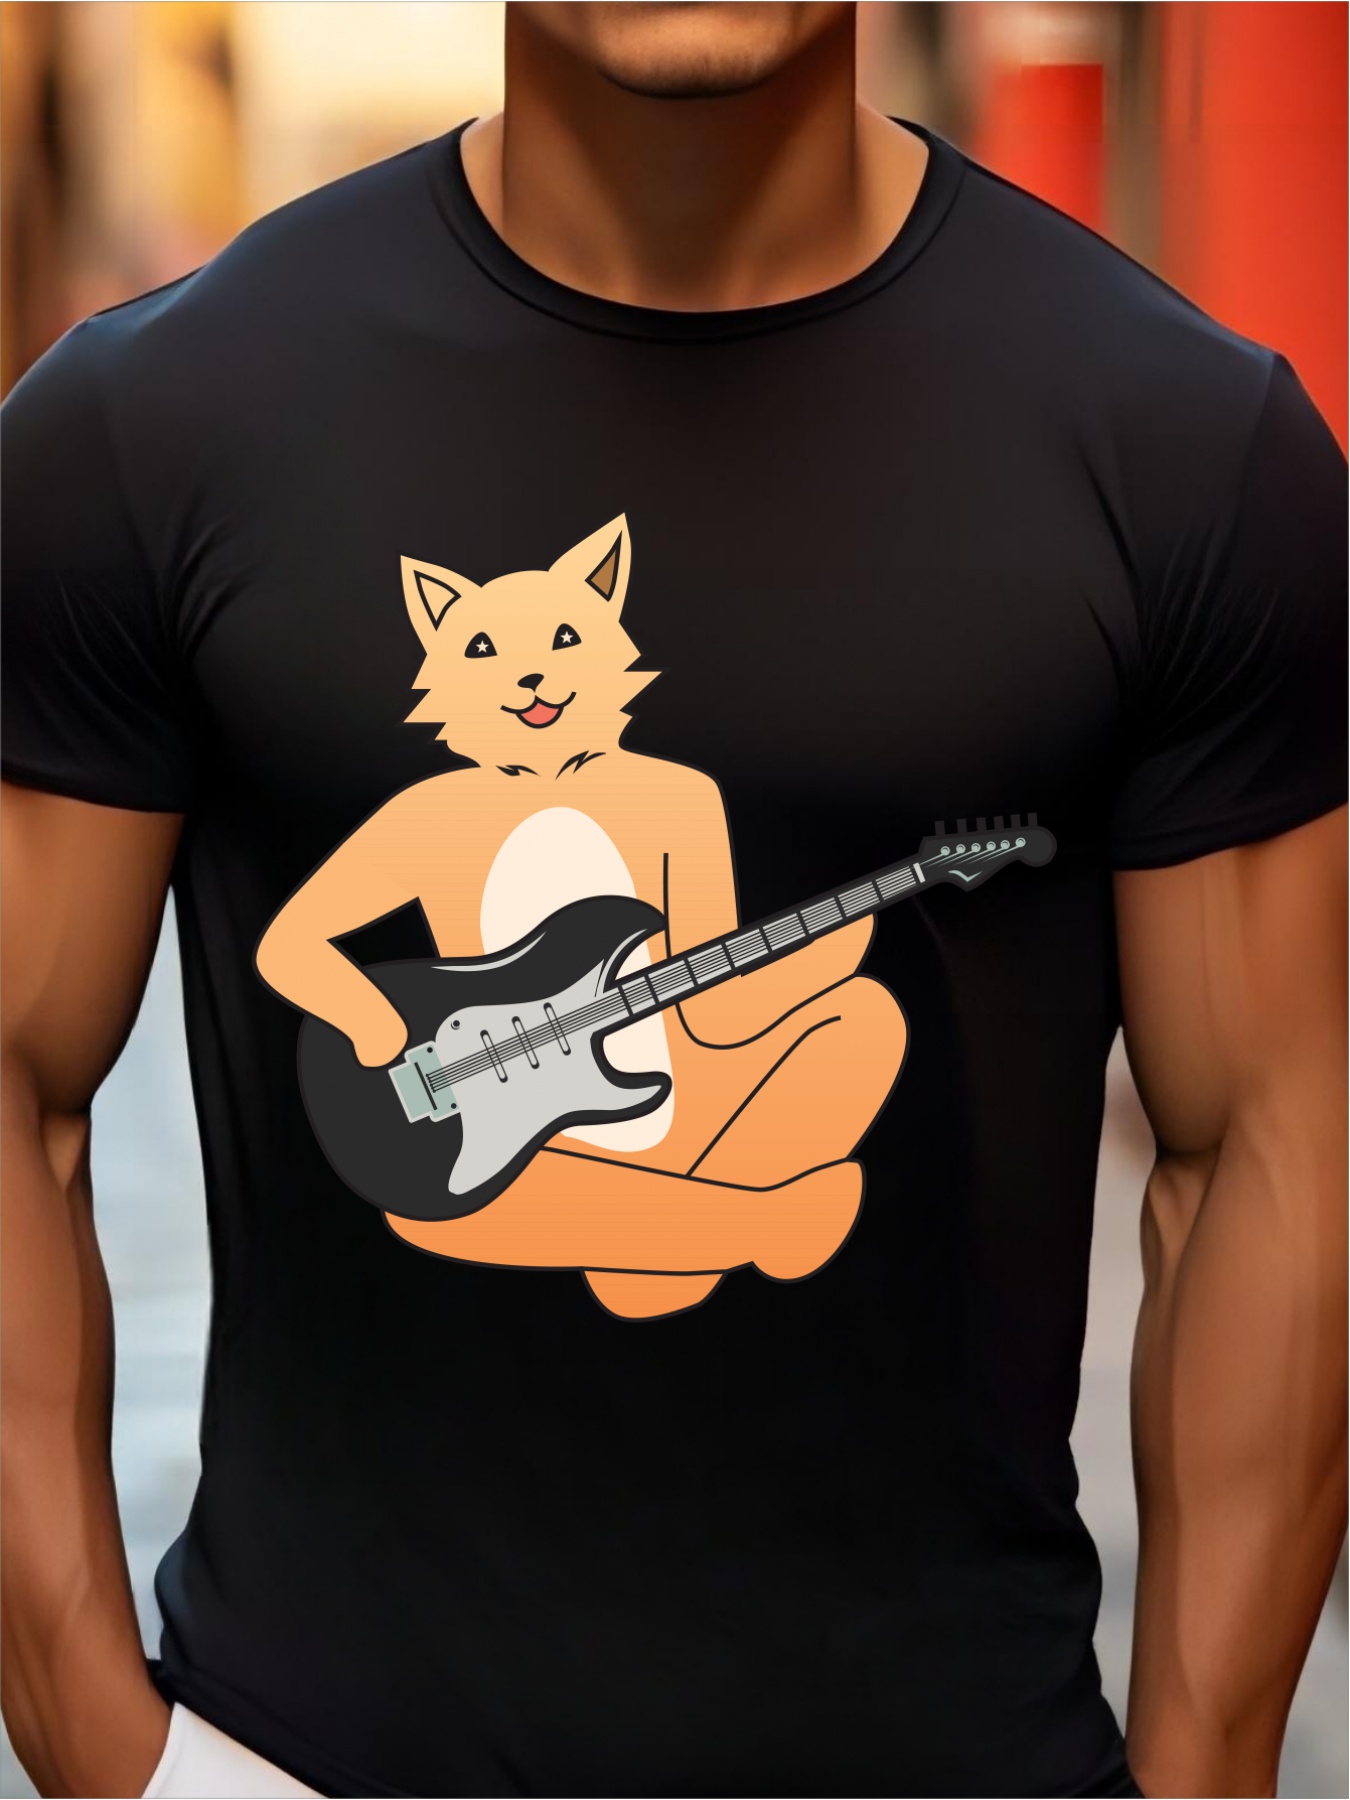 Cat Playing Guitar Print, Men's Graphic Design Crew Active T-shirt, Casual Comfy T-shirts For Summer, Men's Clothing Tops For Gym Workout Running - Temu